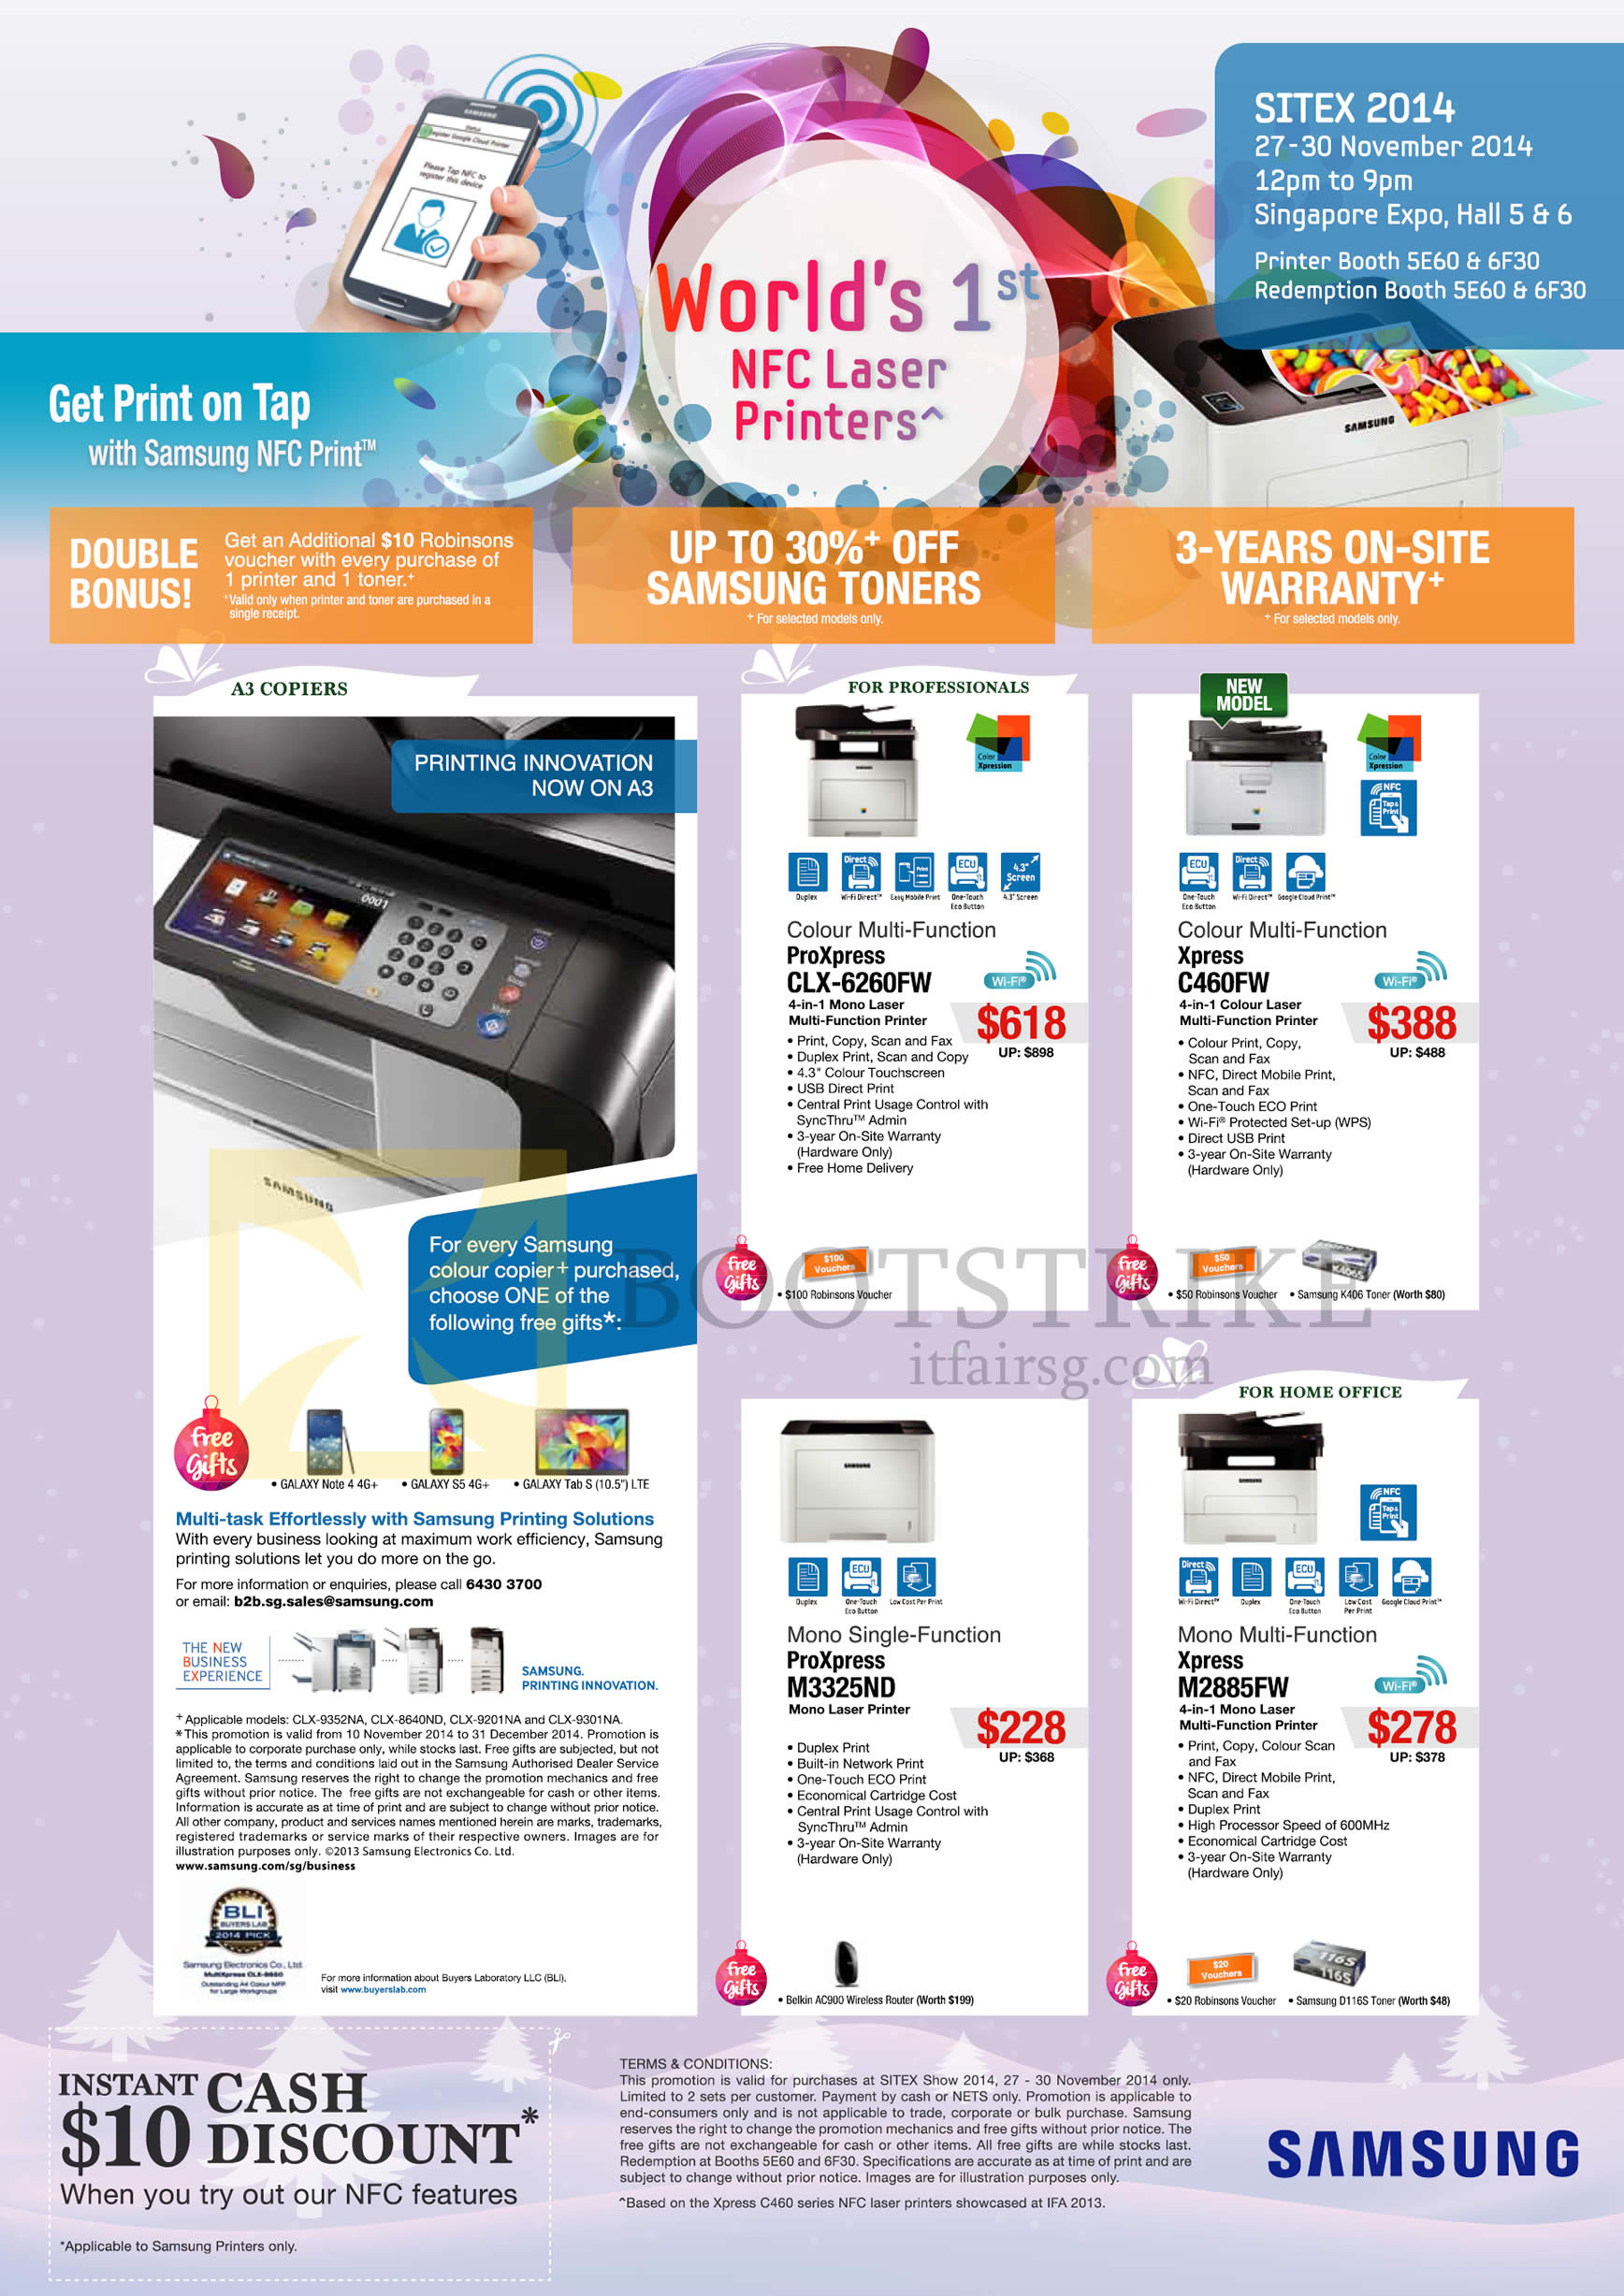 SITEX 2014 price list image brochure of Samsung Printers Laser ProXpress CLX-6260FW, C460FW, M3325ND, M2885FW